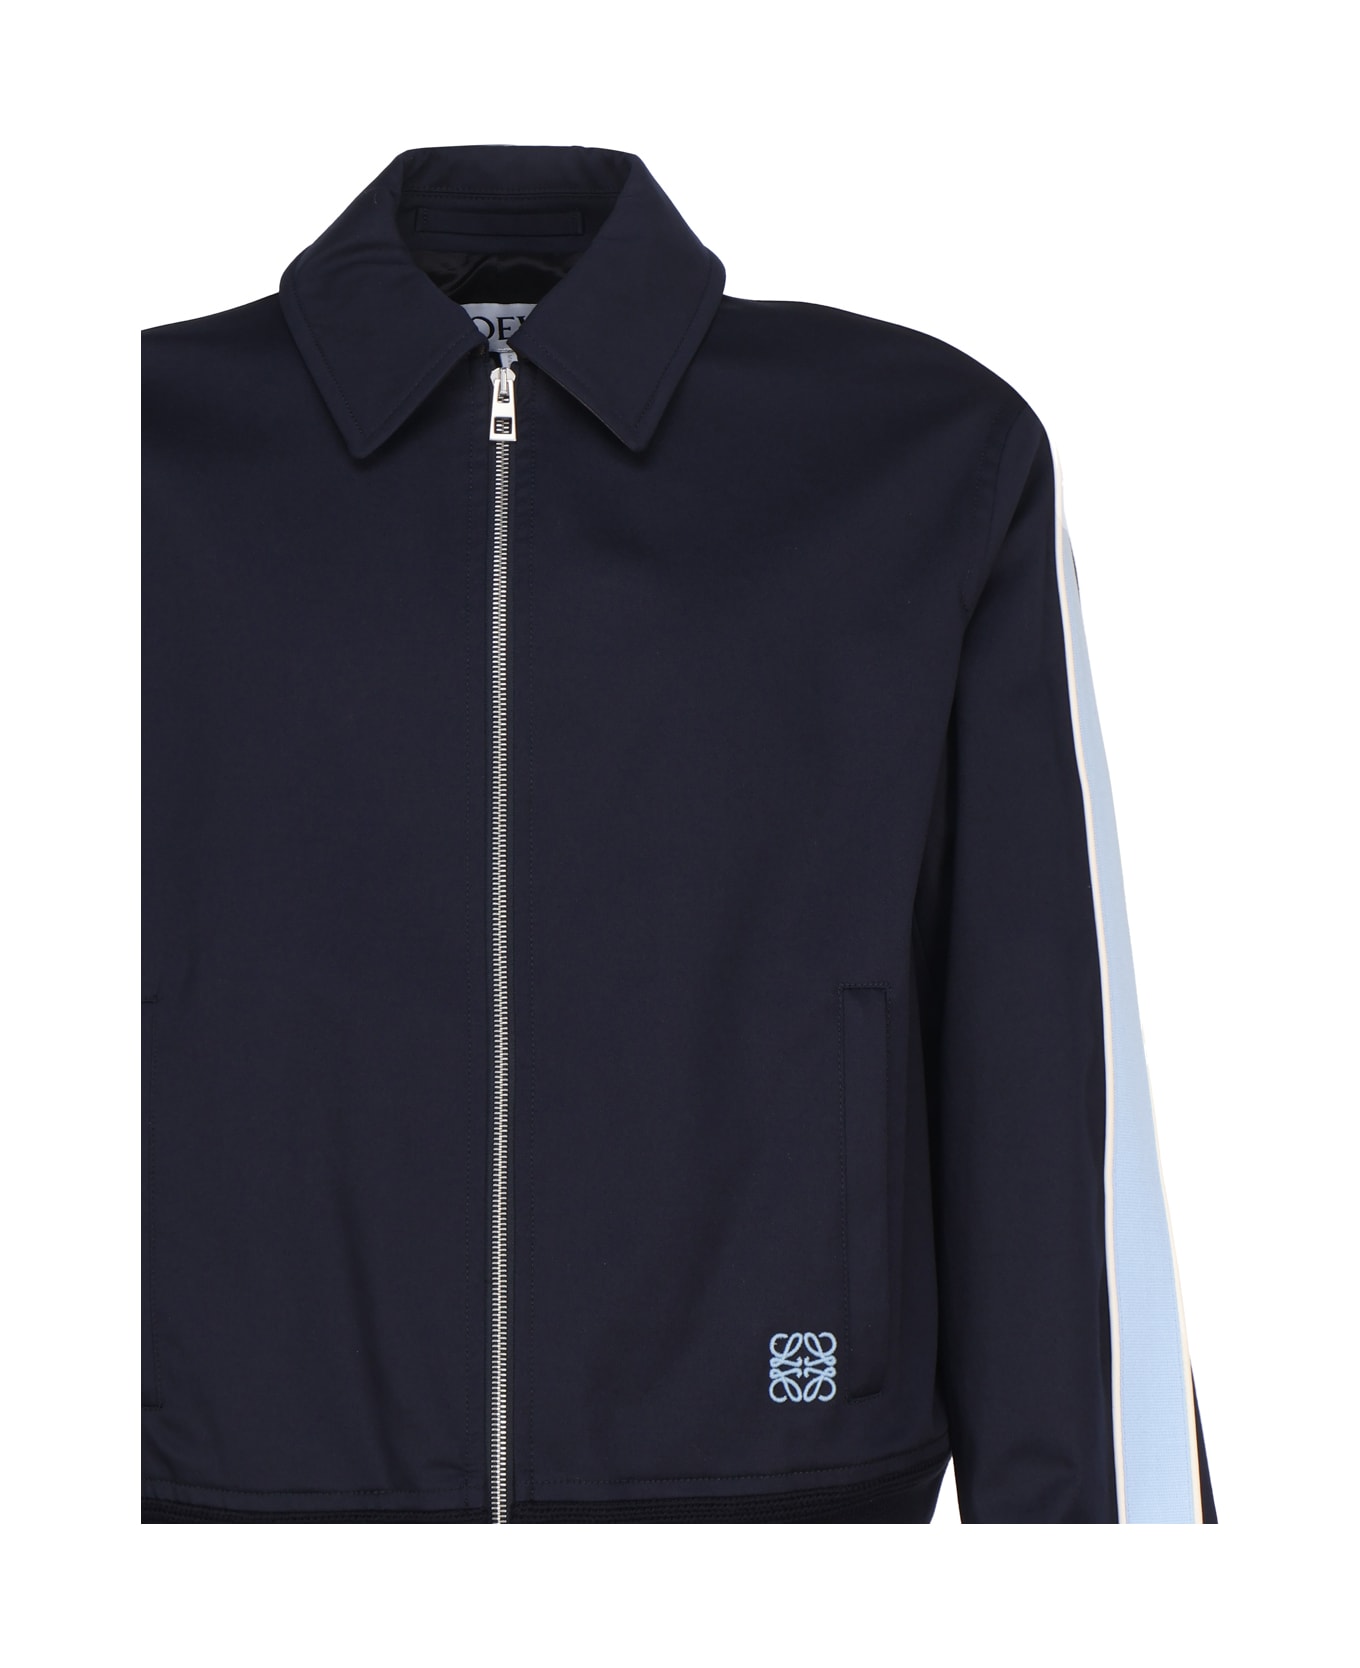 Loewe Jacket With Zip And Side Band - Blue